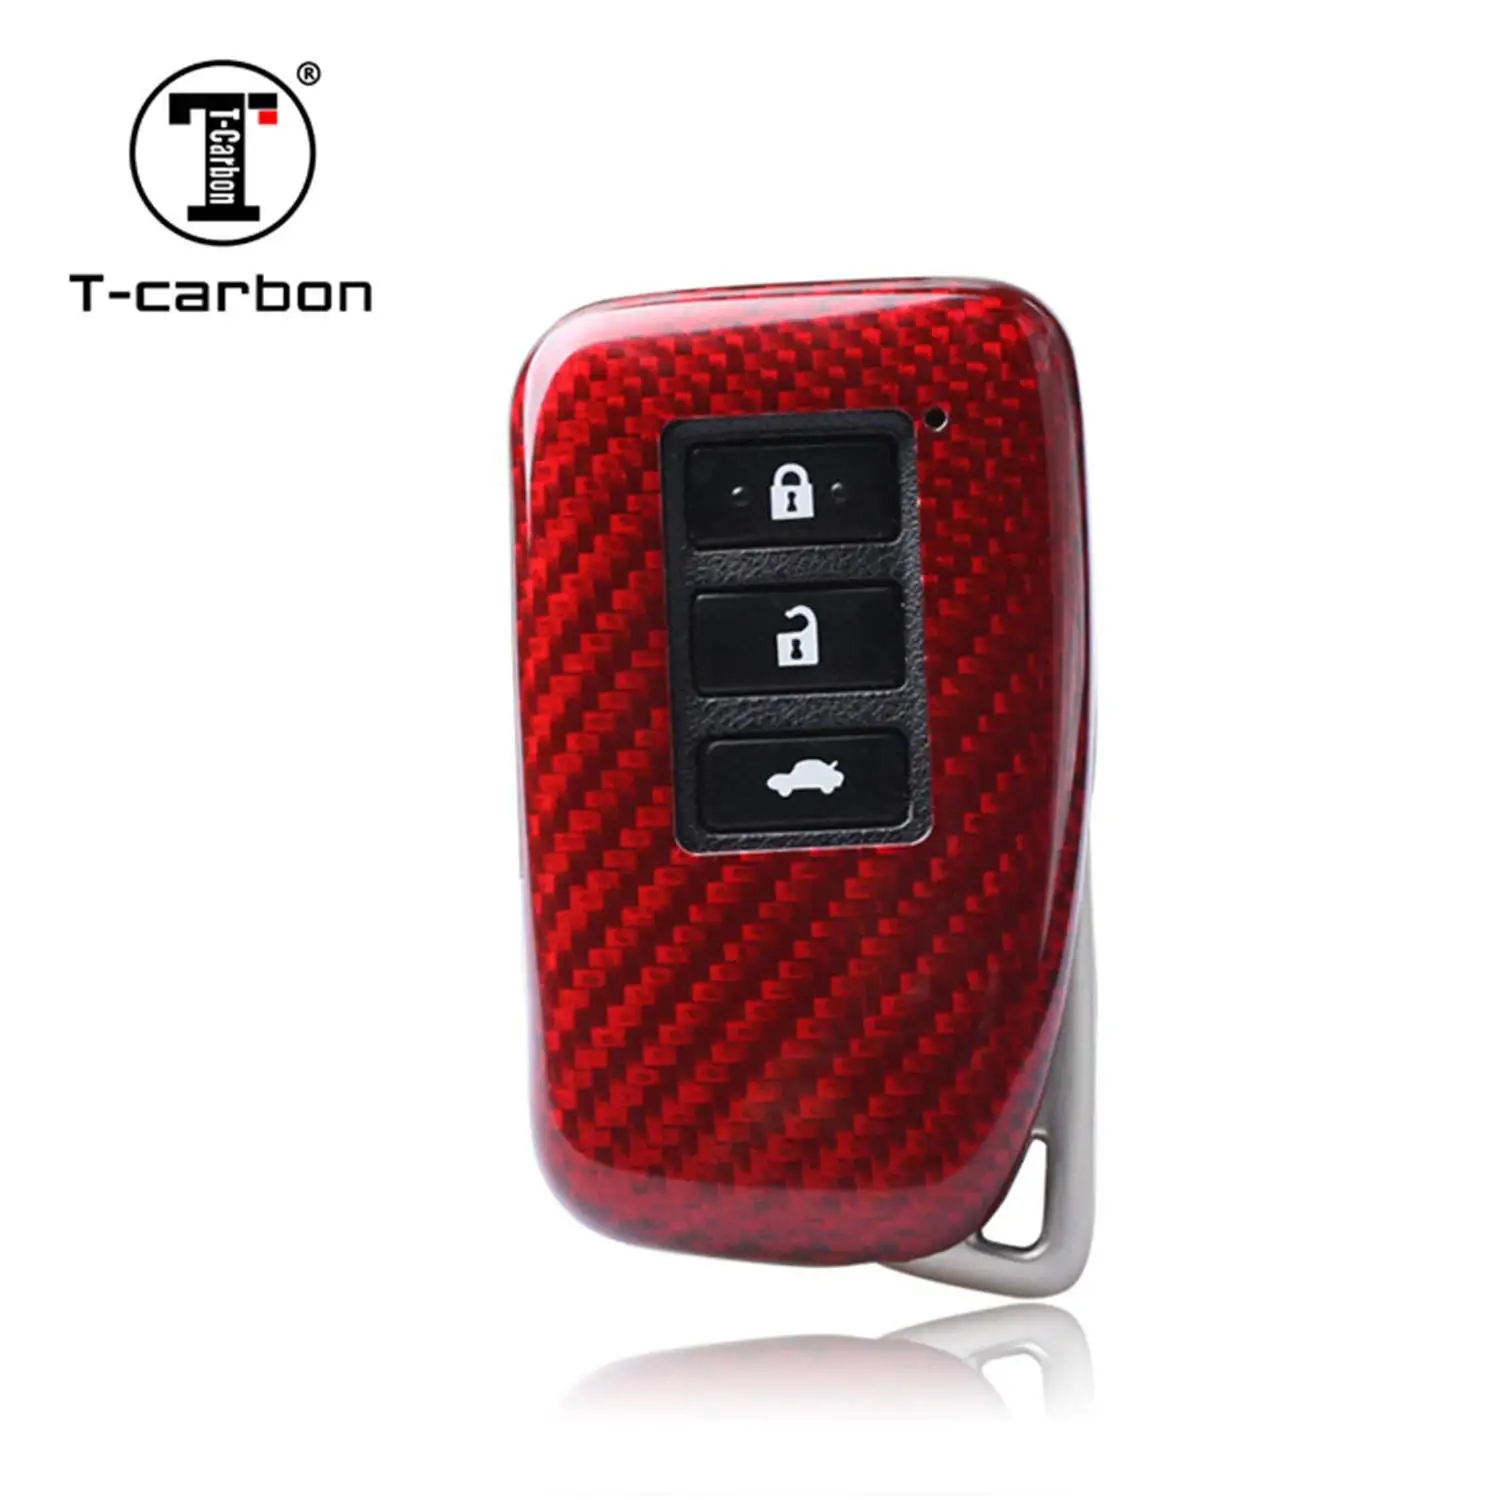 Metallic Glossy TPU Full Protection Keyless Entry Remote Key Fob Case Cover Fit for 5-Buttons 2015-2019 Cadillac Escalade CTS SRX XT5 ATS STS